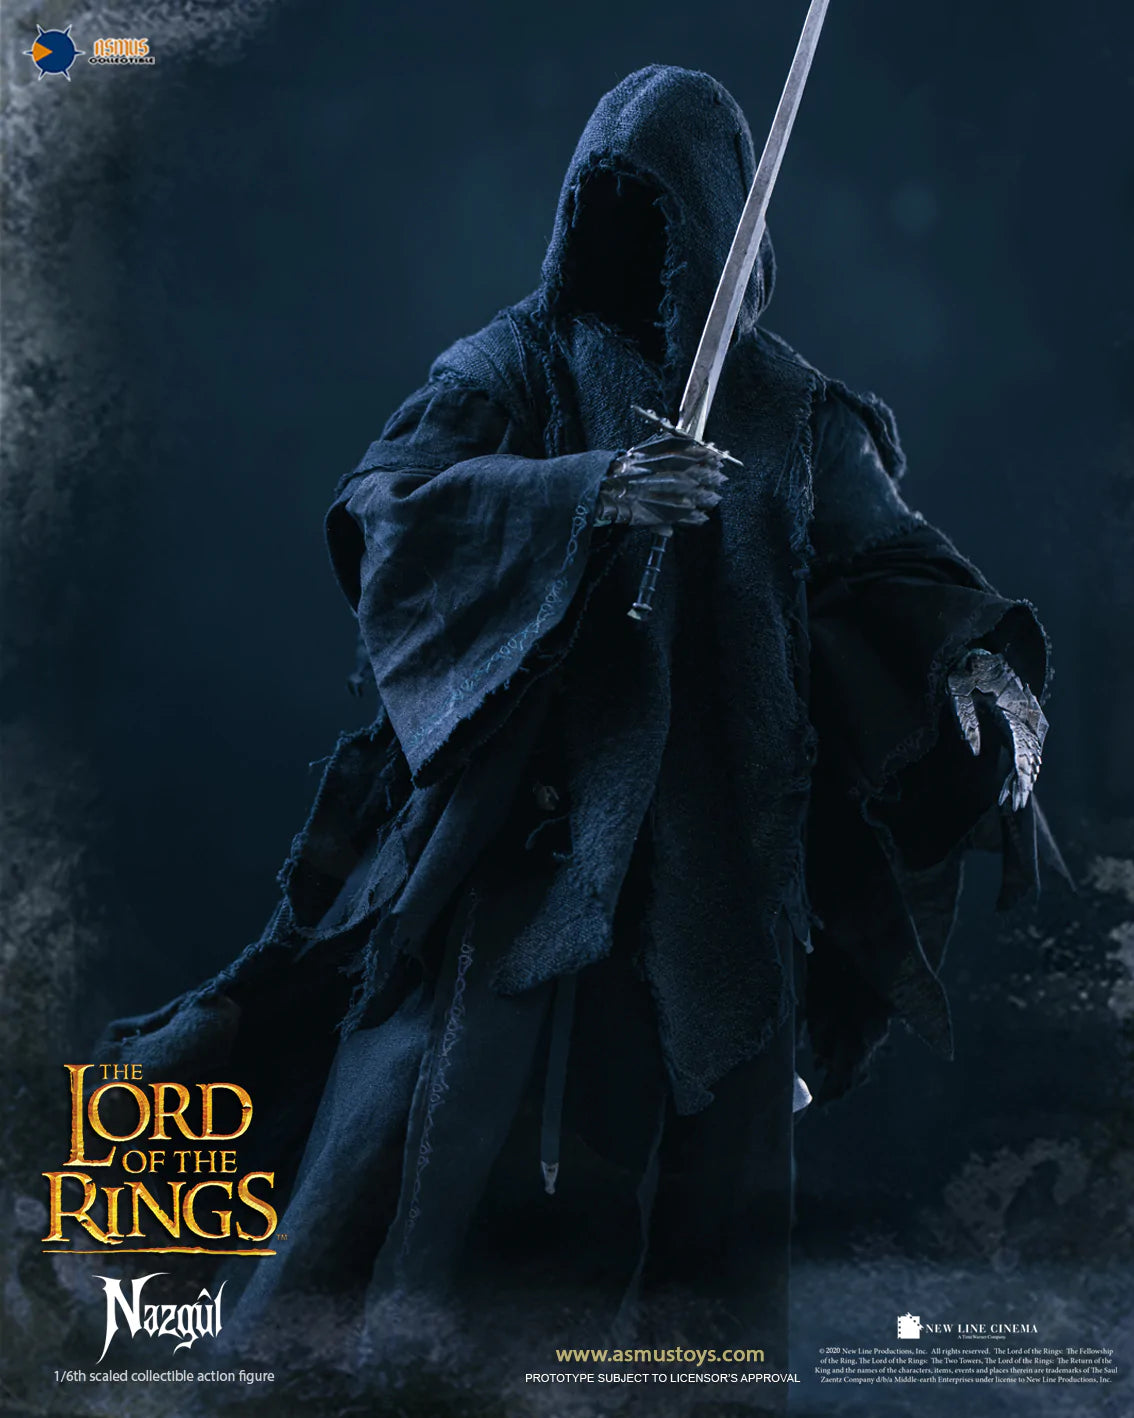 ASMUS TOYS THE LORD OF THE RINGS SERIES Nazgul